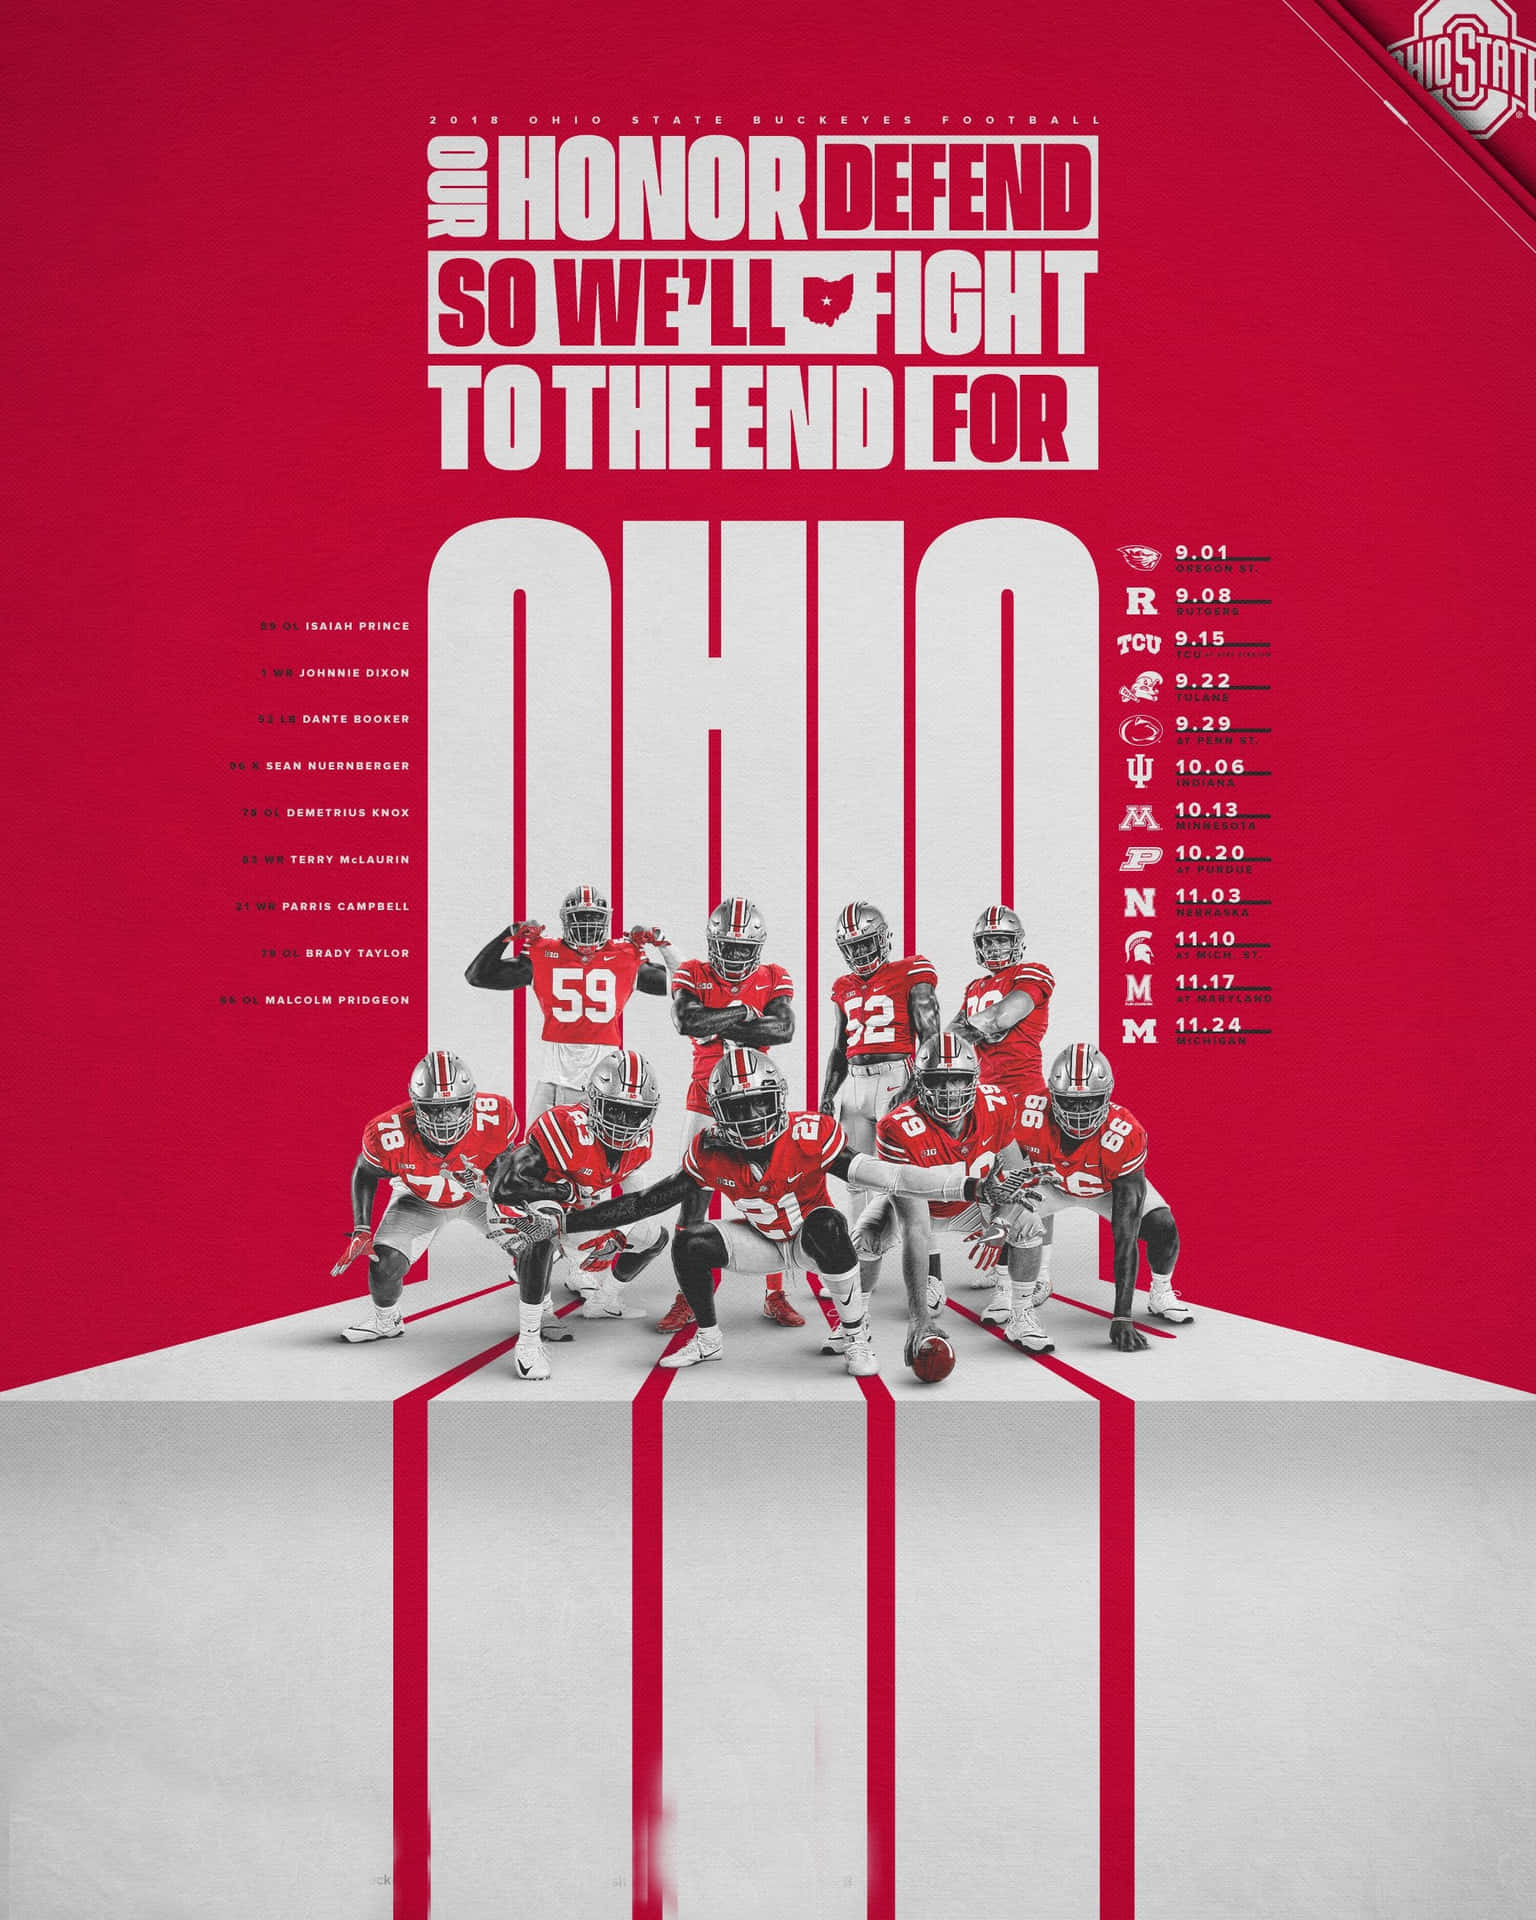 Get Your Ohio State Football Game Day Gear Ready to Watch the Buckeyes Play! Wallpaper